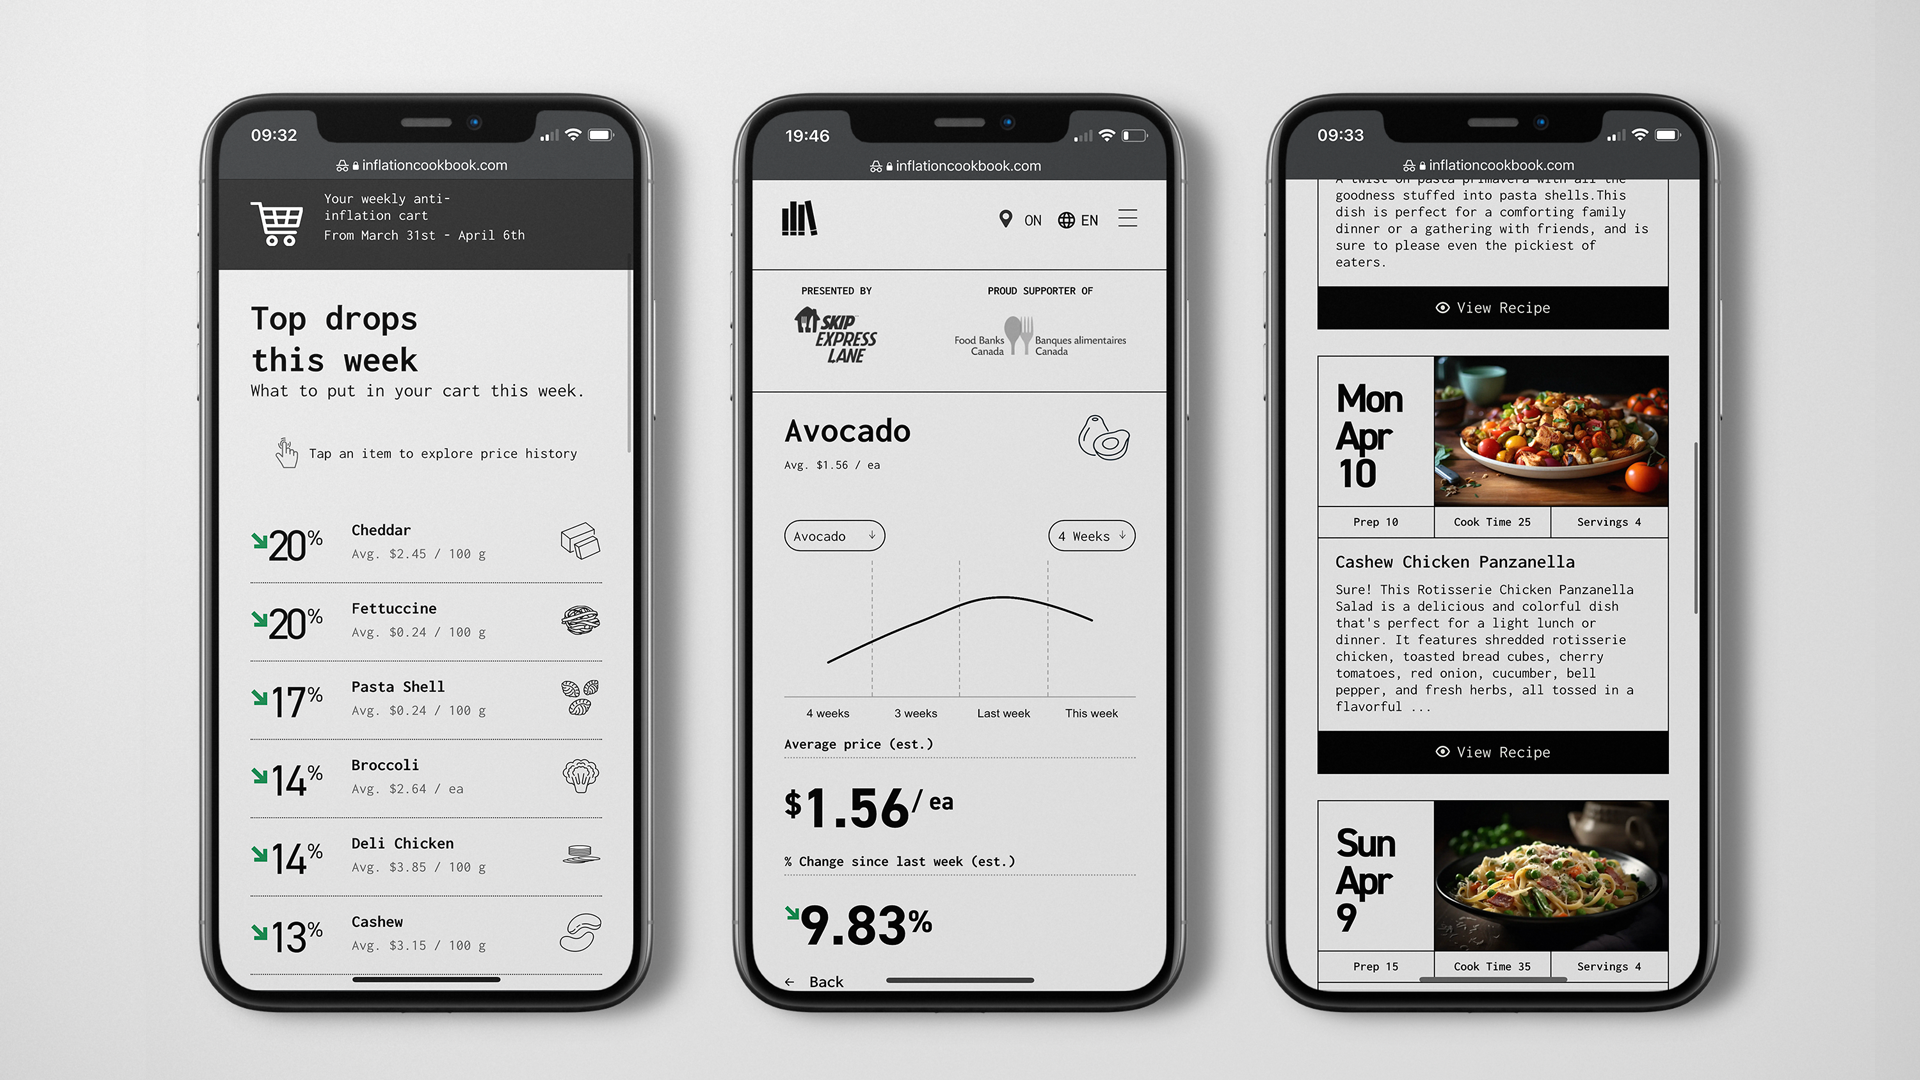 The Inflation Cookbook user interface on mobile